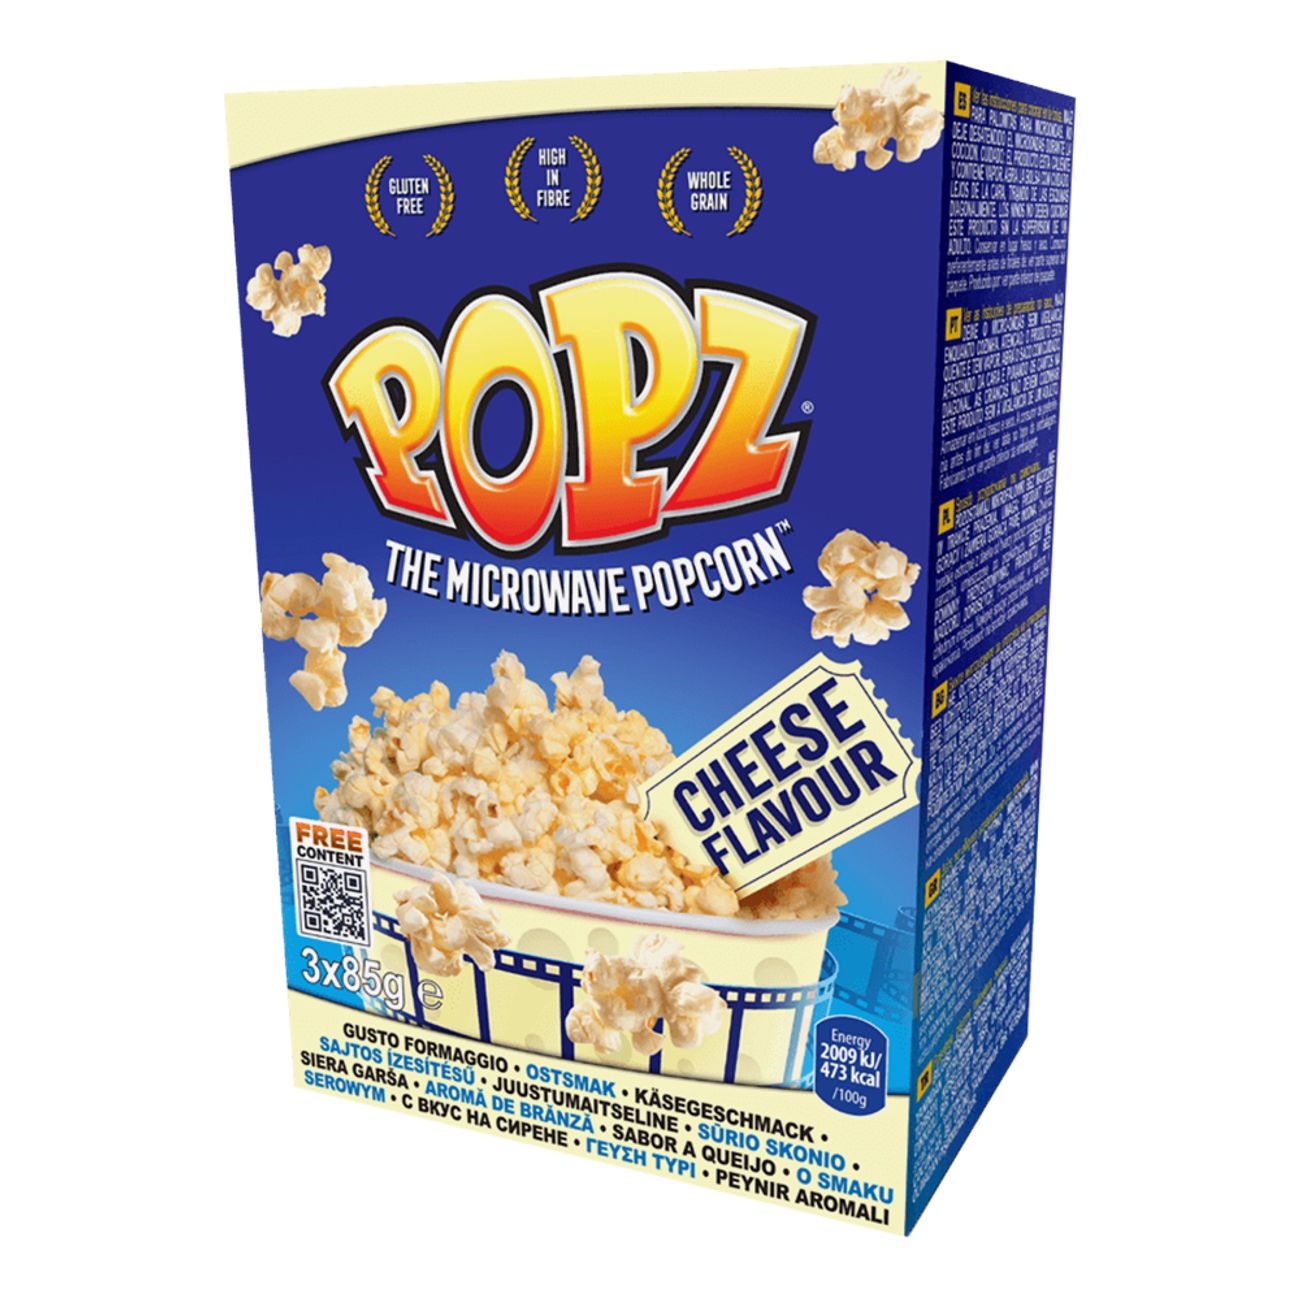 popz-micropop-cheese-101686-1